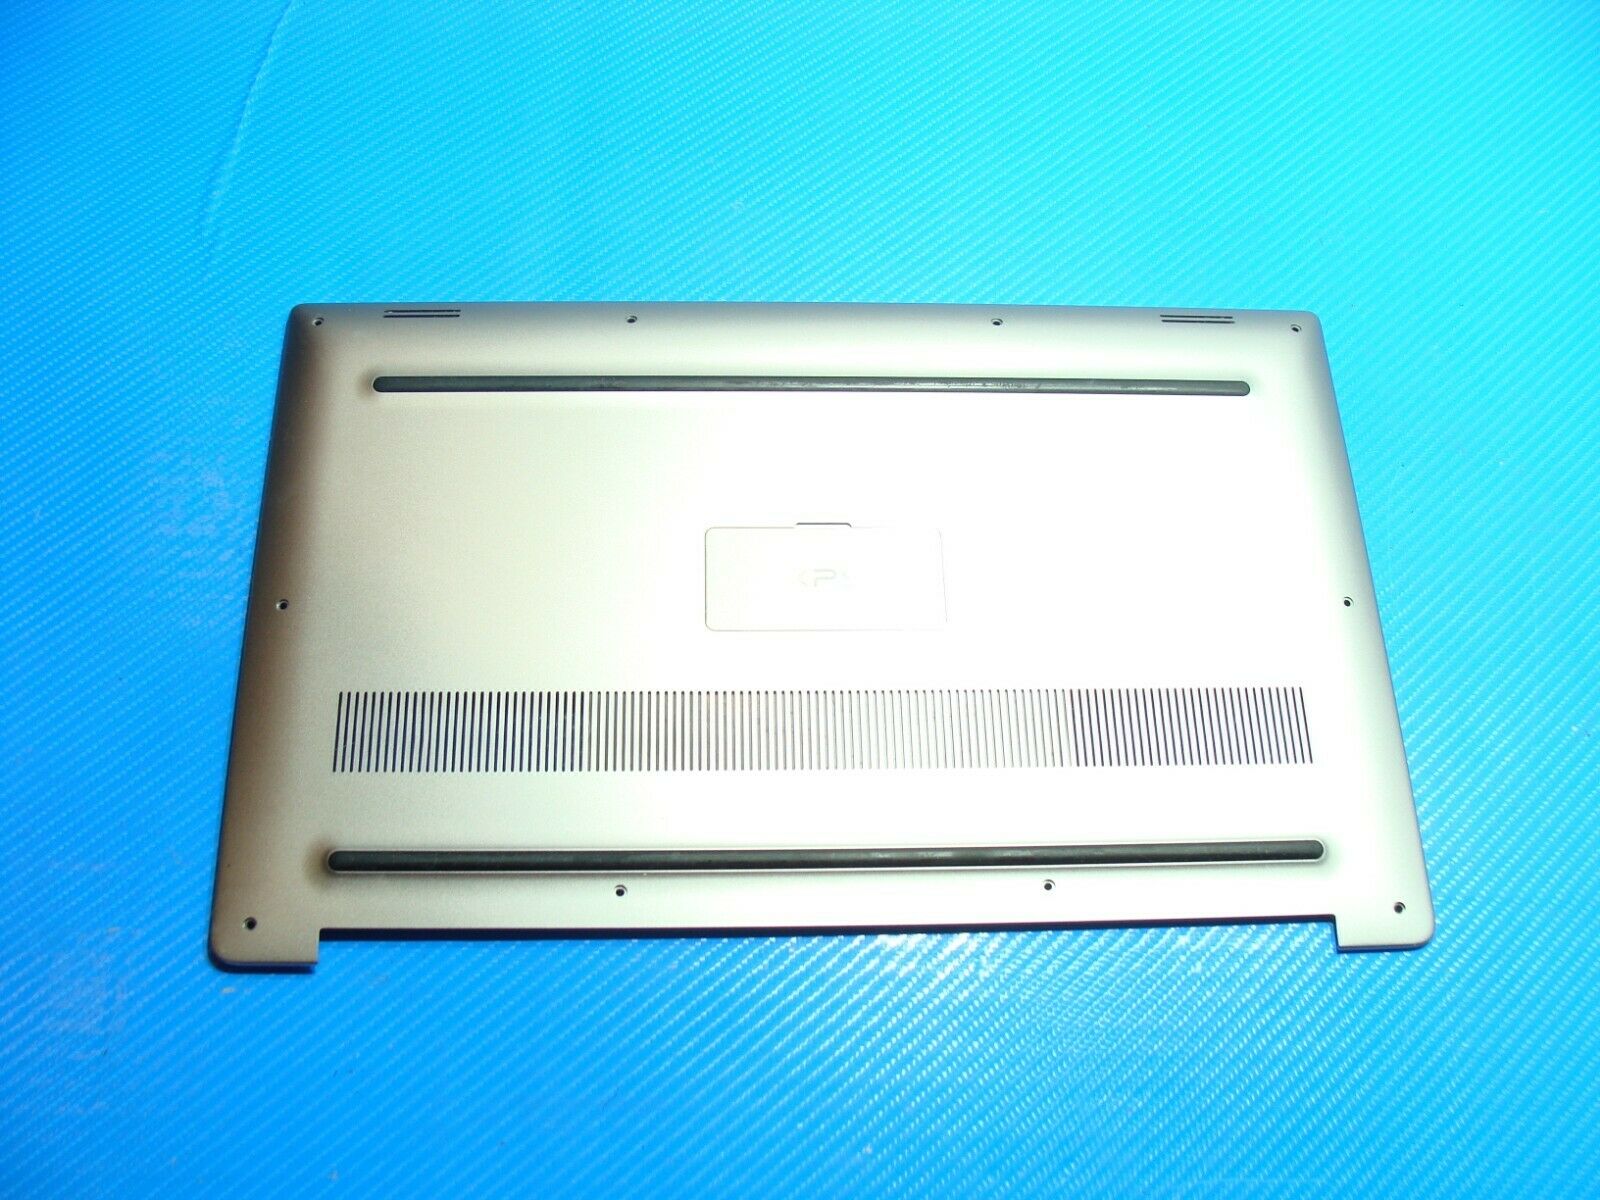 Dell XPS 15 9560 15.6